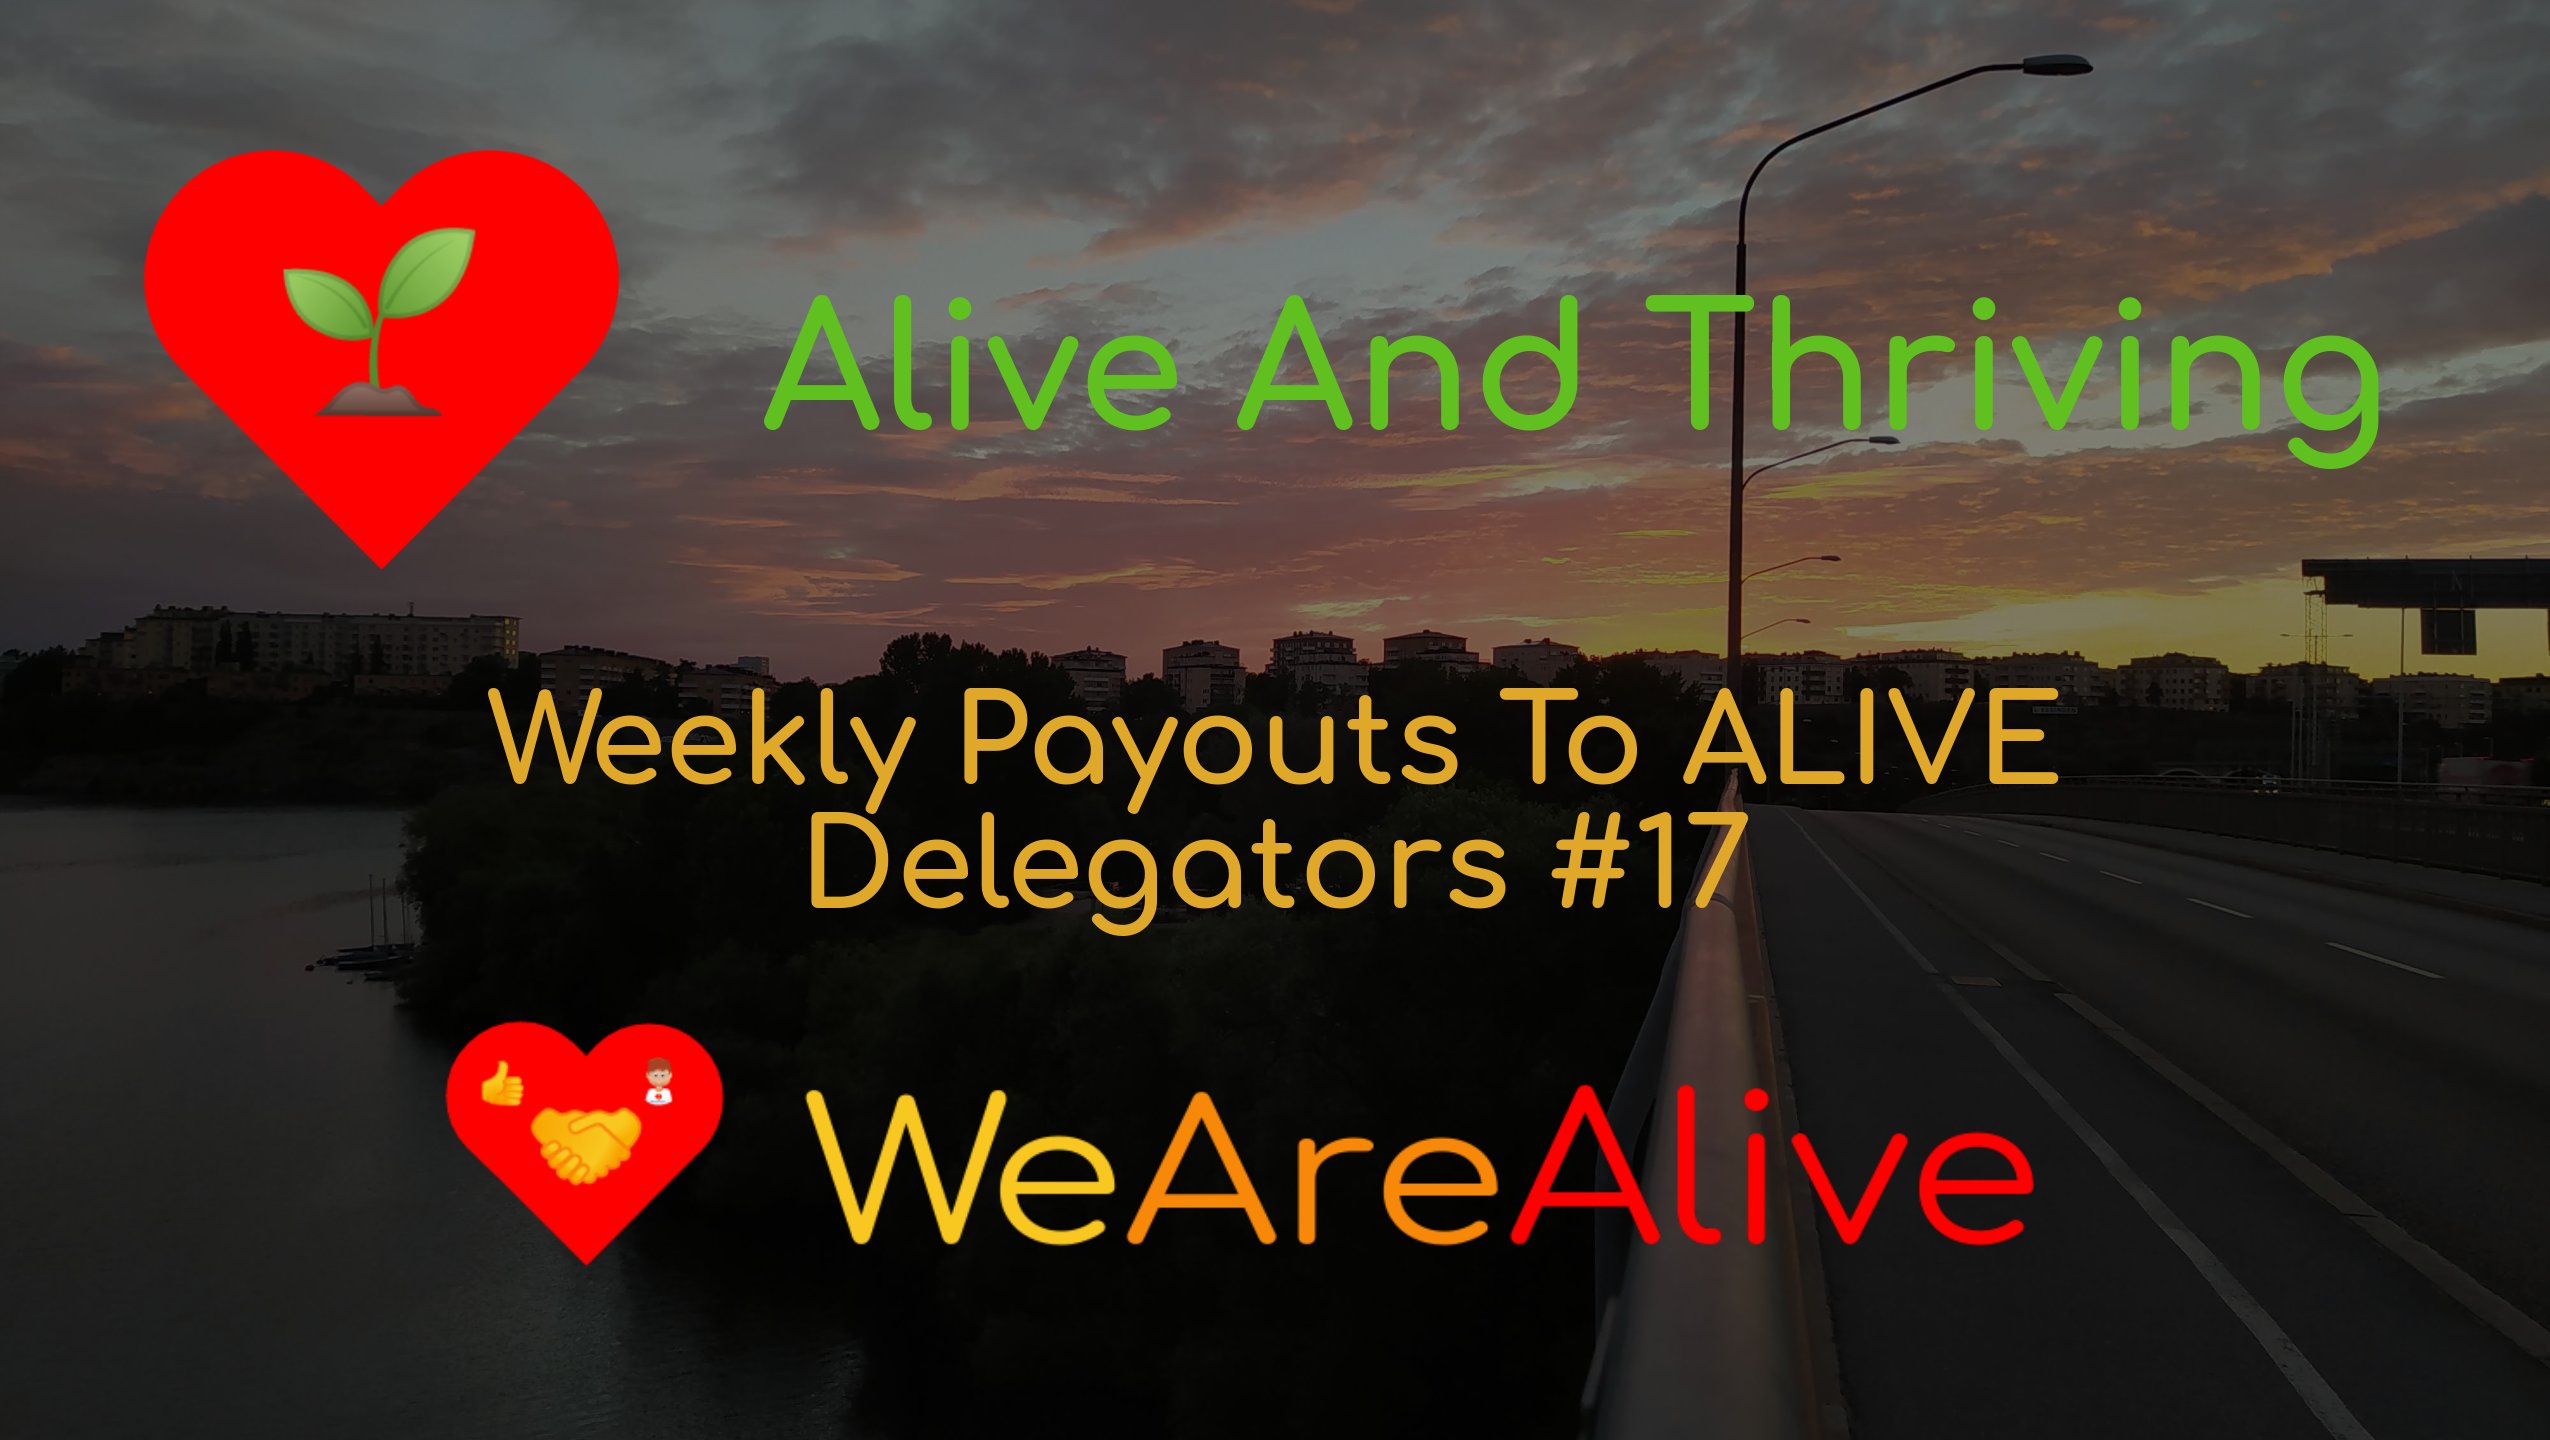 @wearealive/alive-and-thriving-weekly-payouts-to-alive-delegators-17